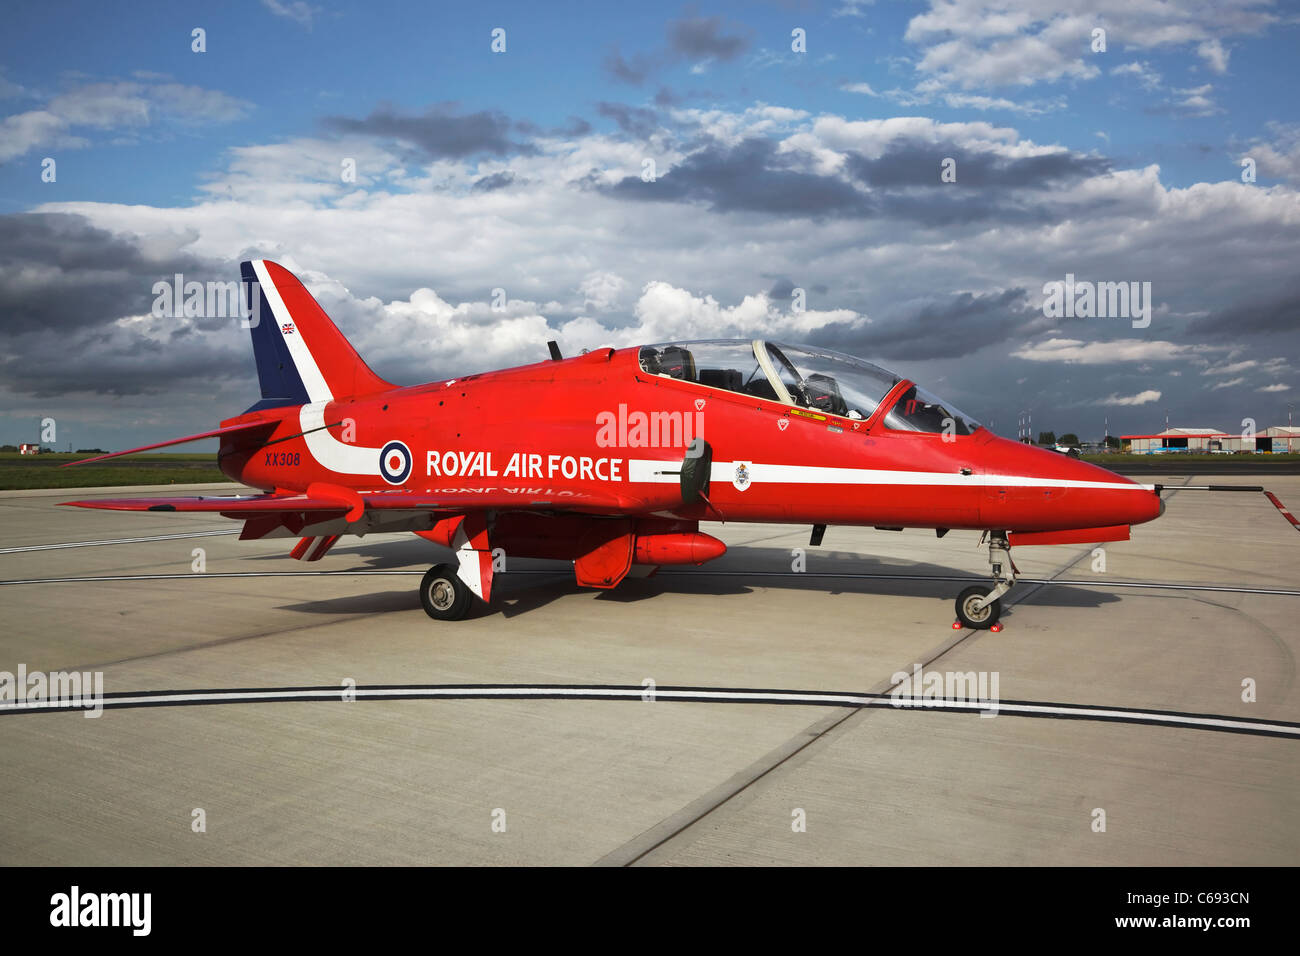 A Bae systems Hawk T1 training aircraft of the RAF's Red Arrows aerobatic team Stock Photo